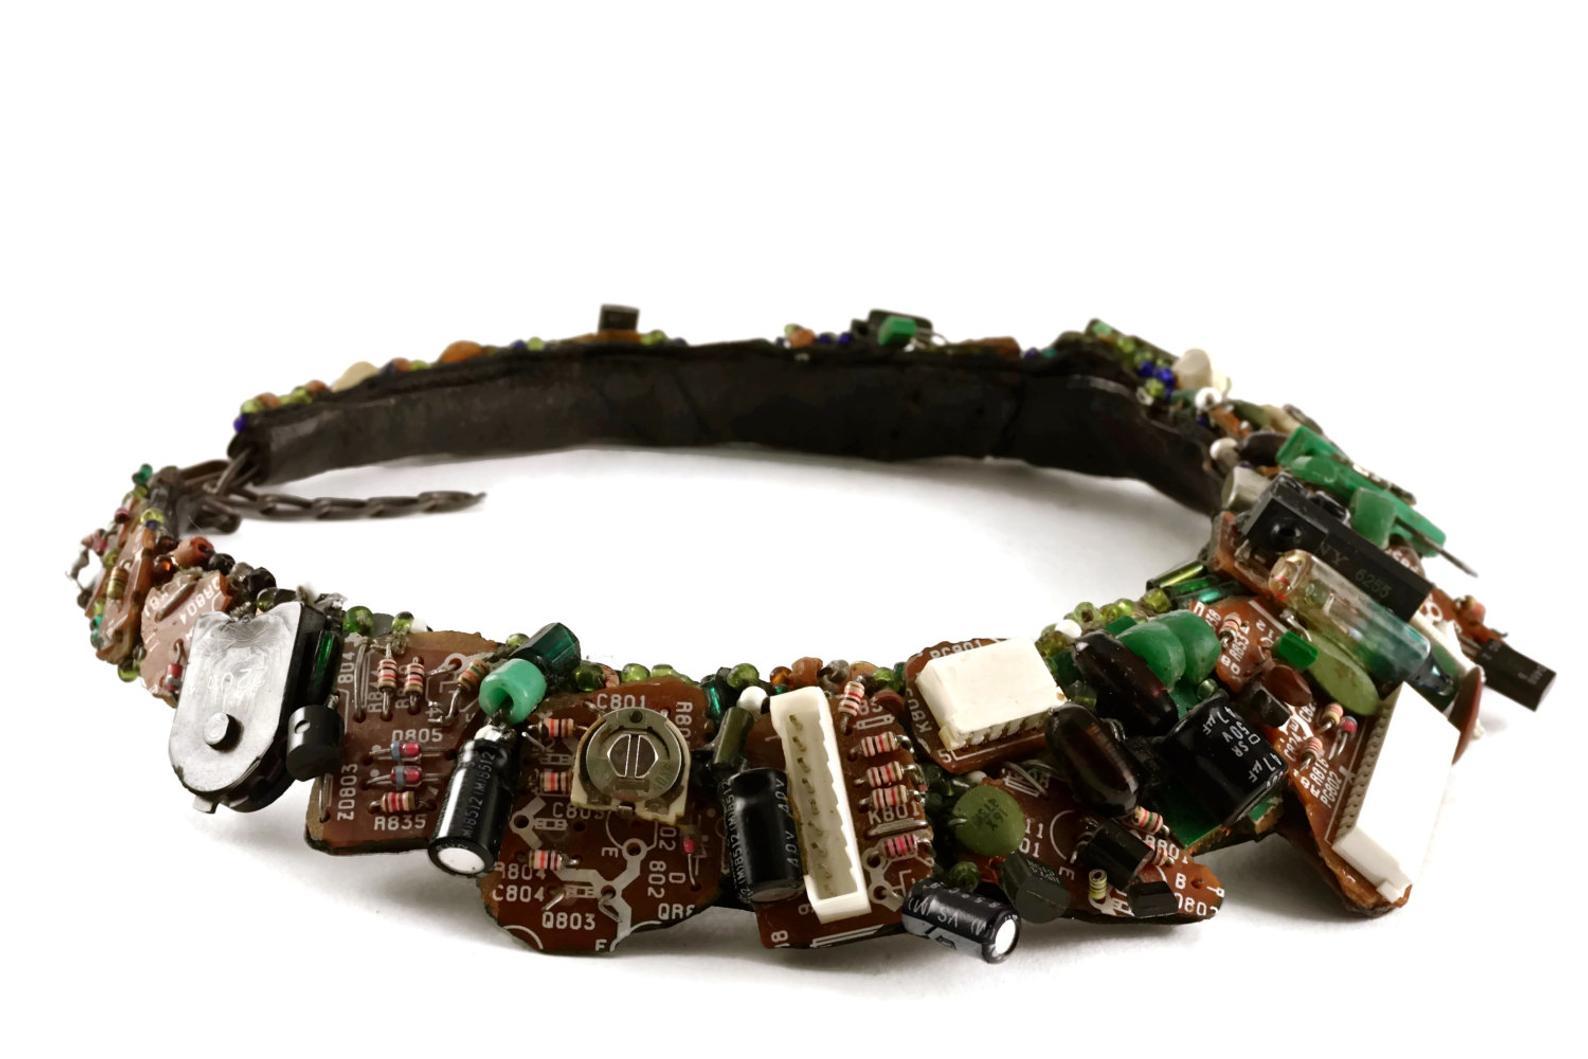 Vintage LILIANE MULLER Electronic Motherboard Choker Necklace

Measurements:
Height: 1 6/8 inches
Depth: 1.5 cms

Features:
- 100% authentic LILIANE MULLER.
- Motherboard with electronic components: resistors, capacitors, diodes, ICs (integrated